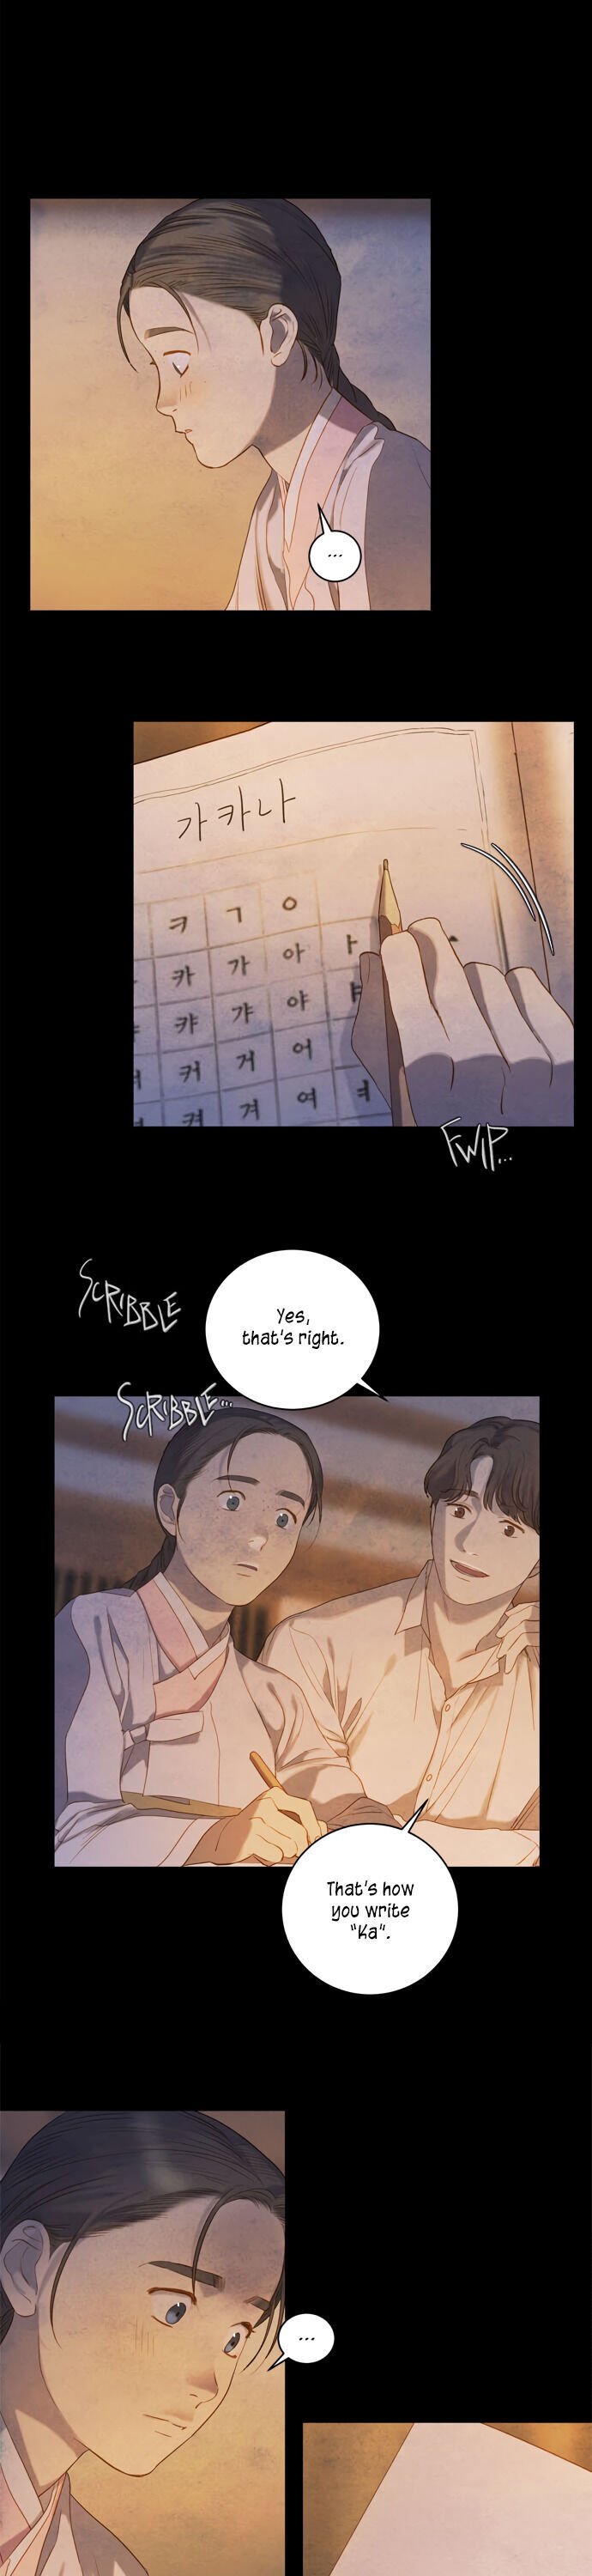 Gorae Byul - The Gyeongseong Mermaid - Chapter 32 Page 4